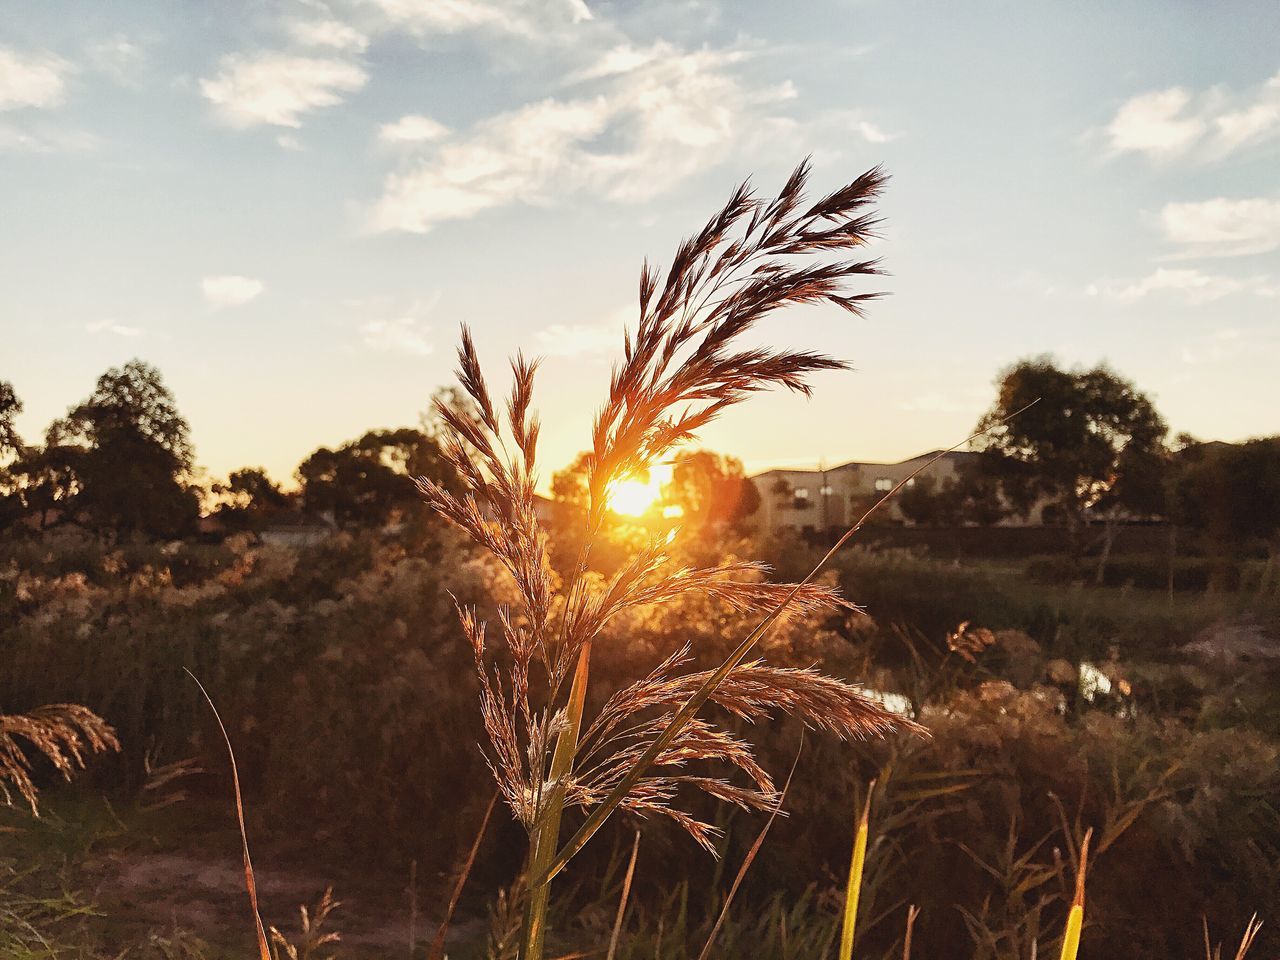 growth, sunset, sun, field, nature, sunbeam, sunlight, sky, agriculture, no people, straw, plant, outdoors, tranquility, landscape, beauty in nature, rural scene, cereal plant, scenics, wheat, close-up, day